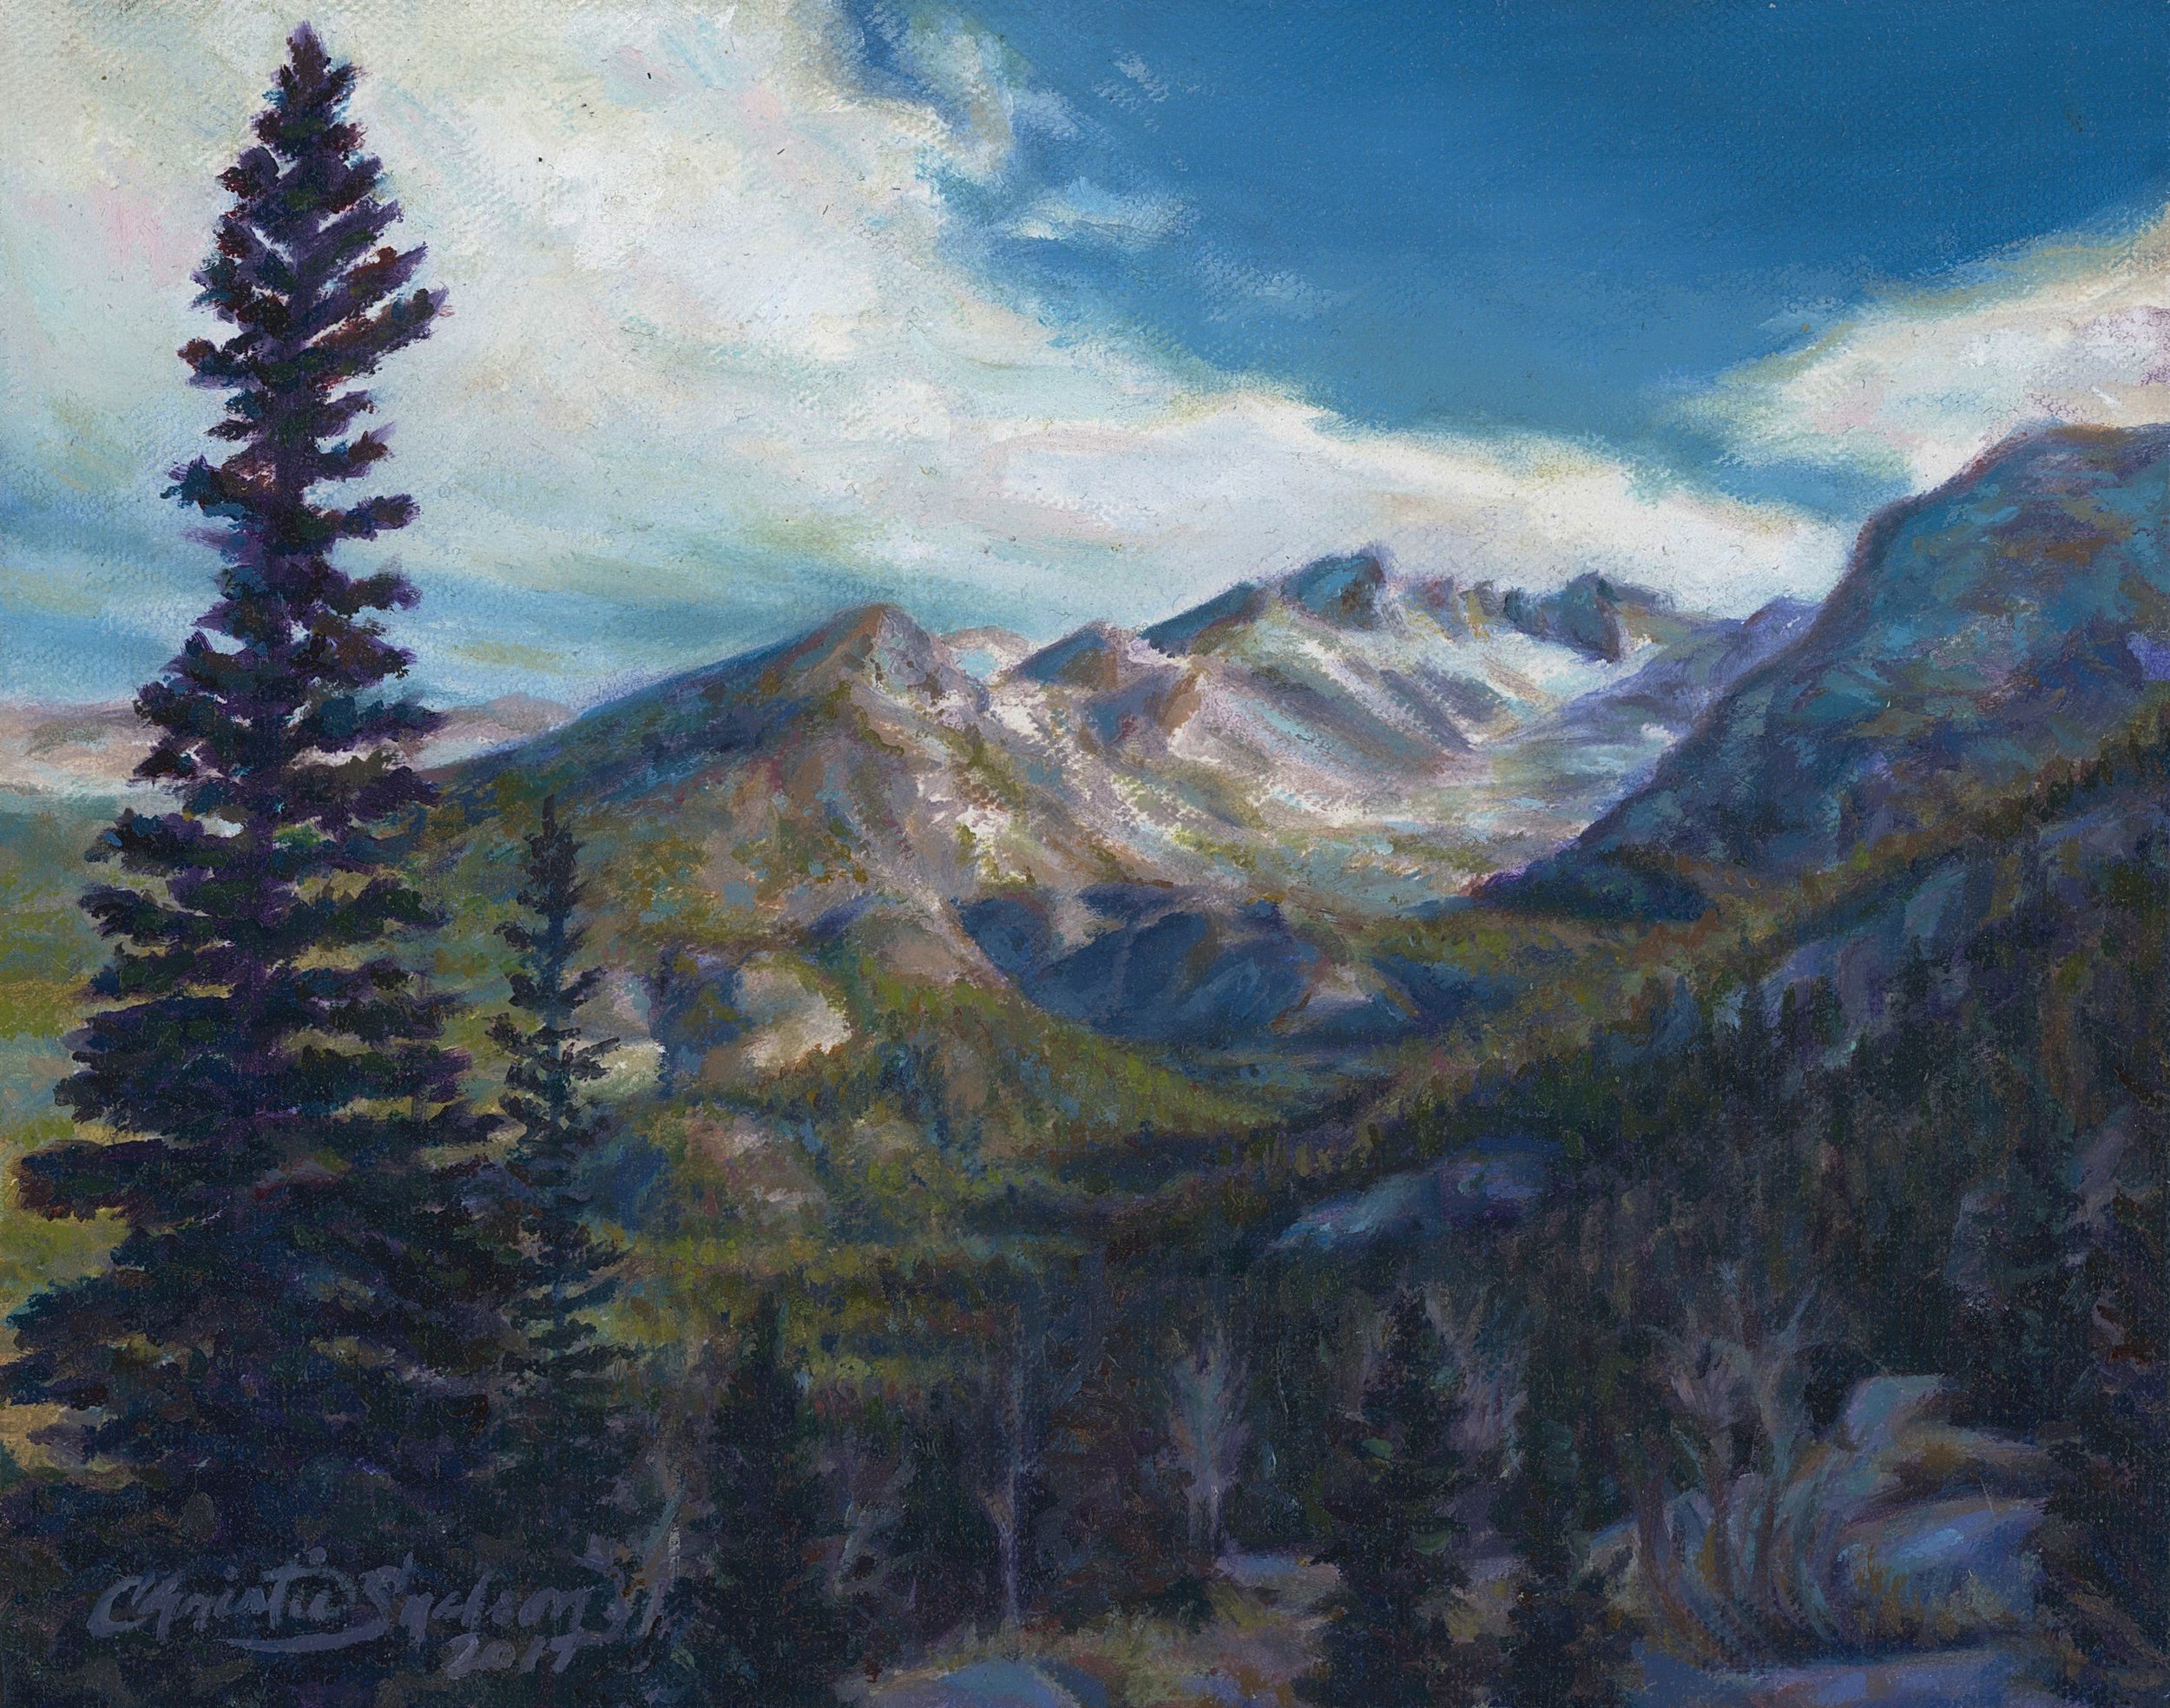 A View from Emerald Lake Trail_8x10_Christie Snelson.jpg